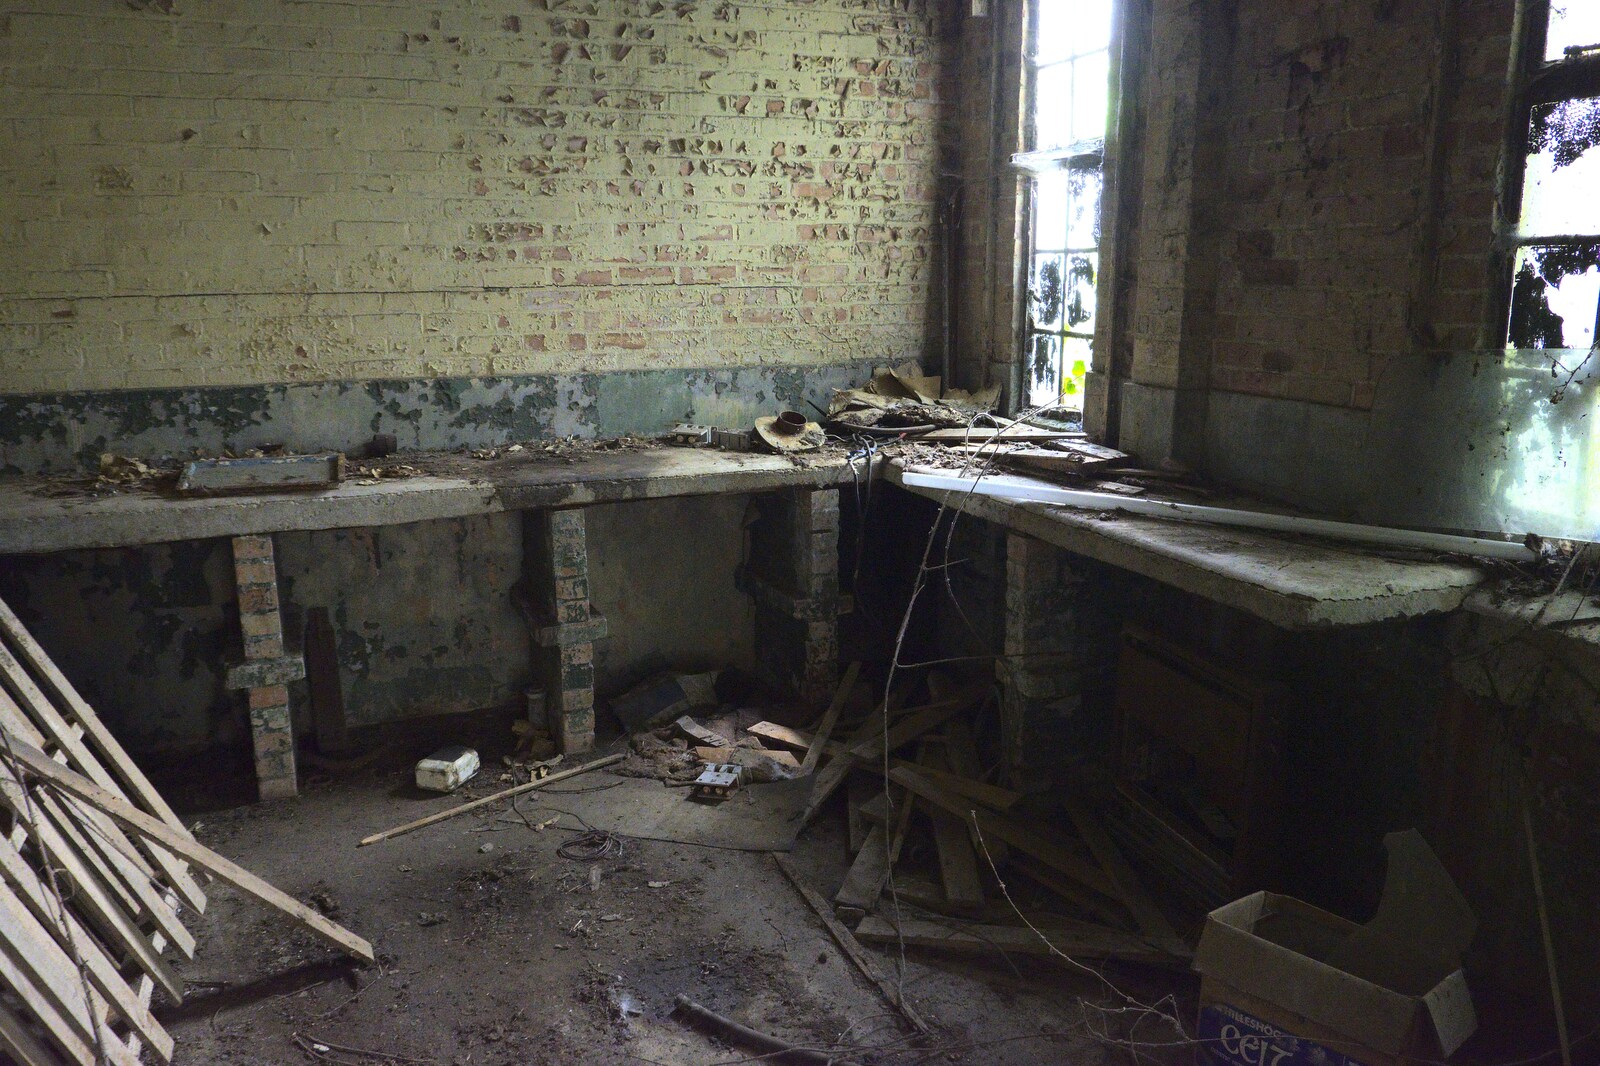 Part of a workshop or maintenance shed from A 1940s Timewarp, Site 4, Bungay Airfield, Flixton, Suffolk - 9th June 2022